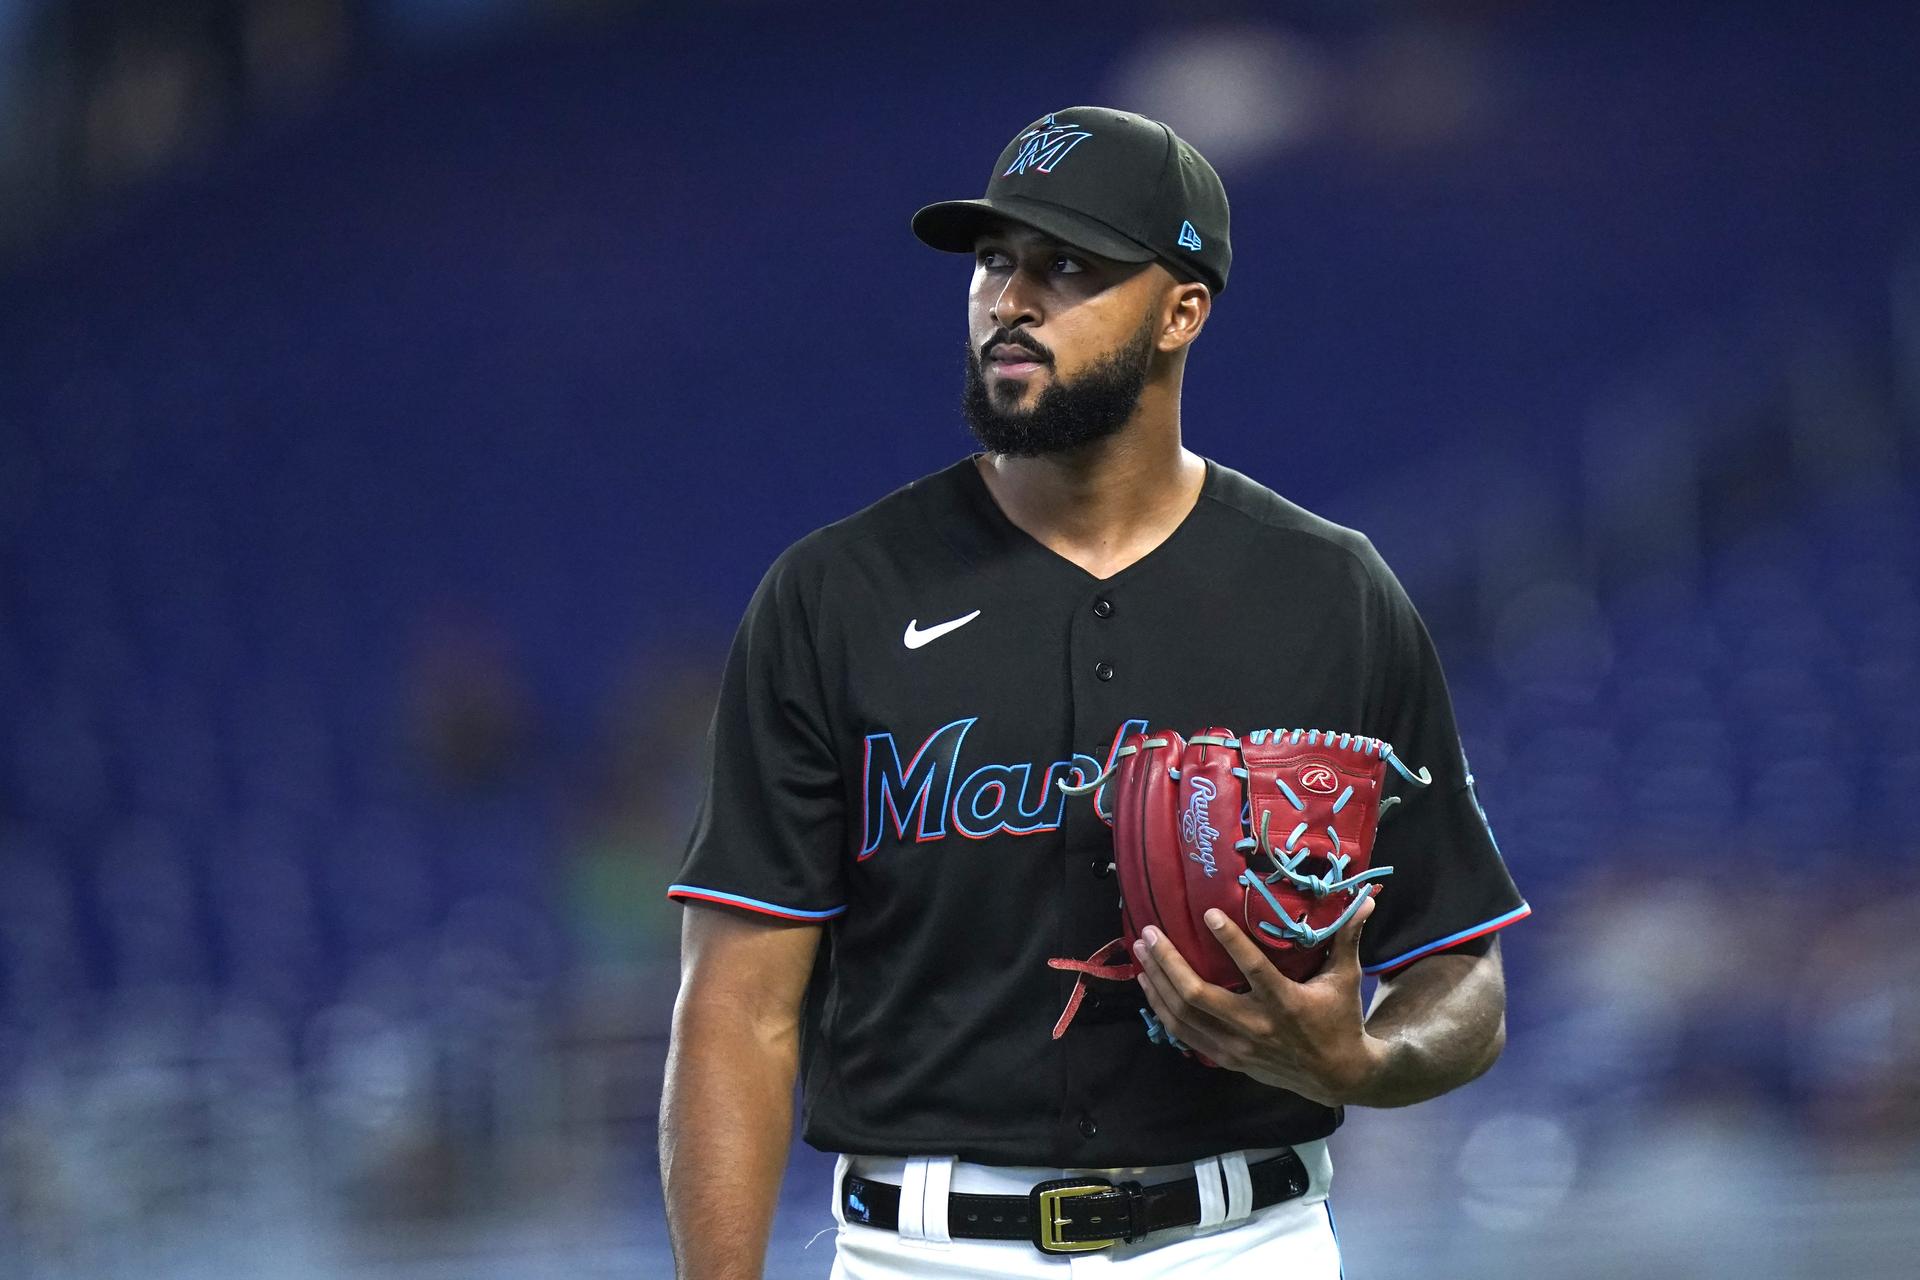 Mets vs. Marlins Player Prop Bets Today – July 29, 2022: Sandy Strikes Again